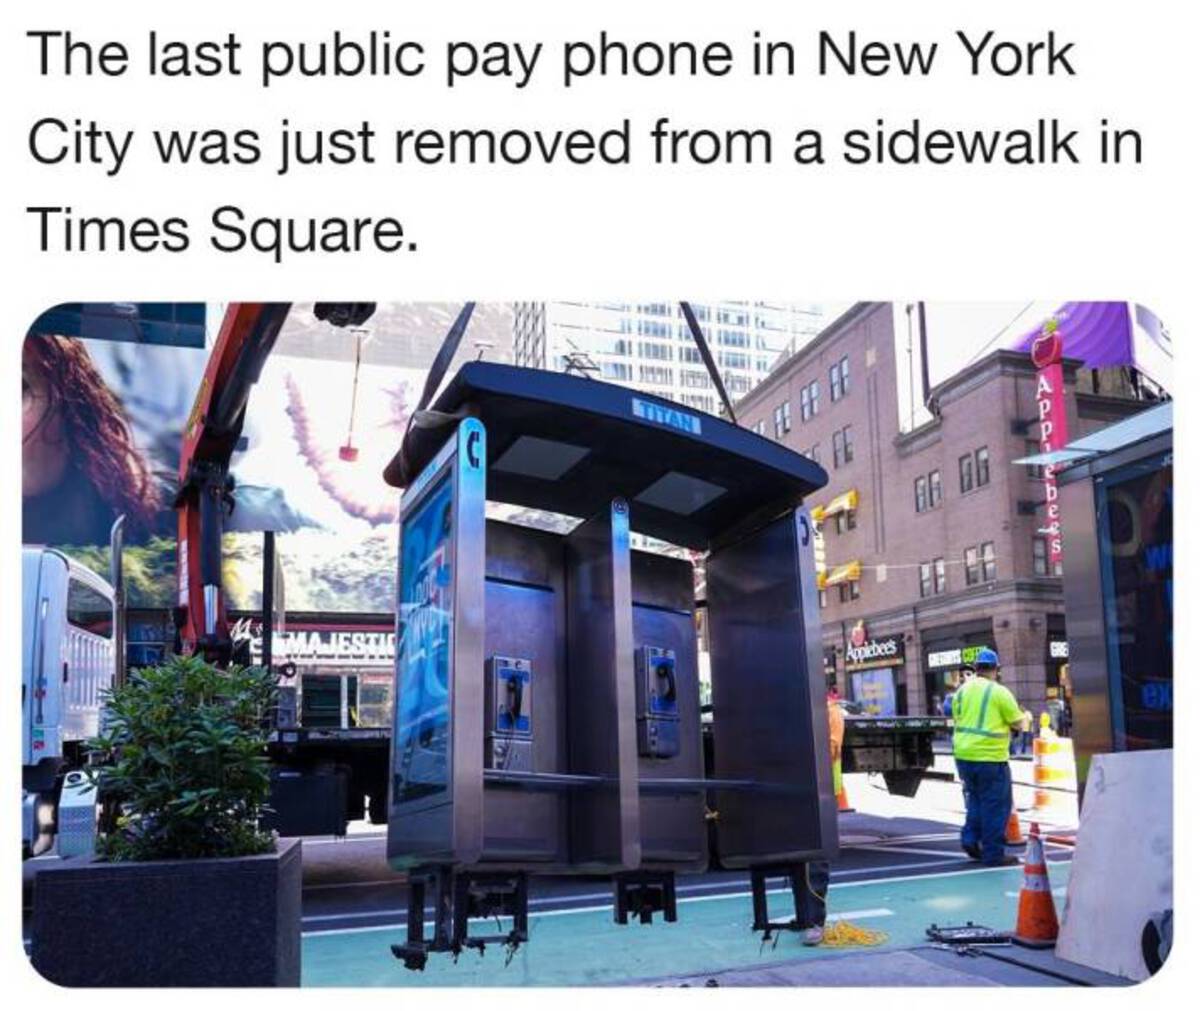 The last public pay phone in New York City was just removed from a sidewalk in Times Square. Majesti Titan Applebees Gg Gg